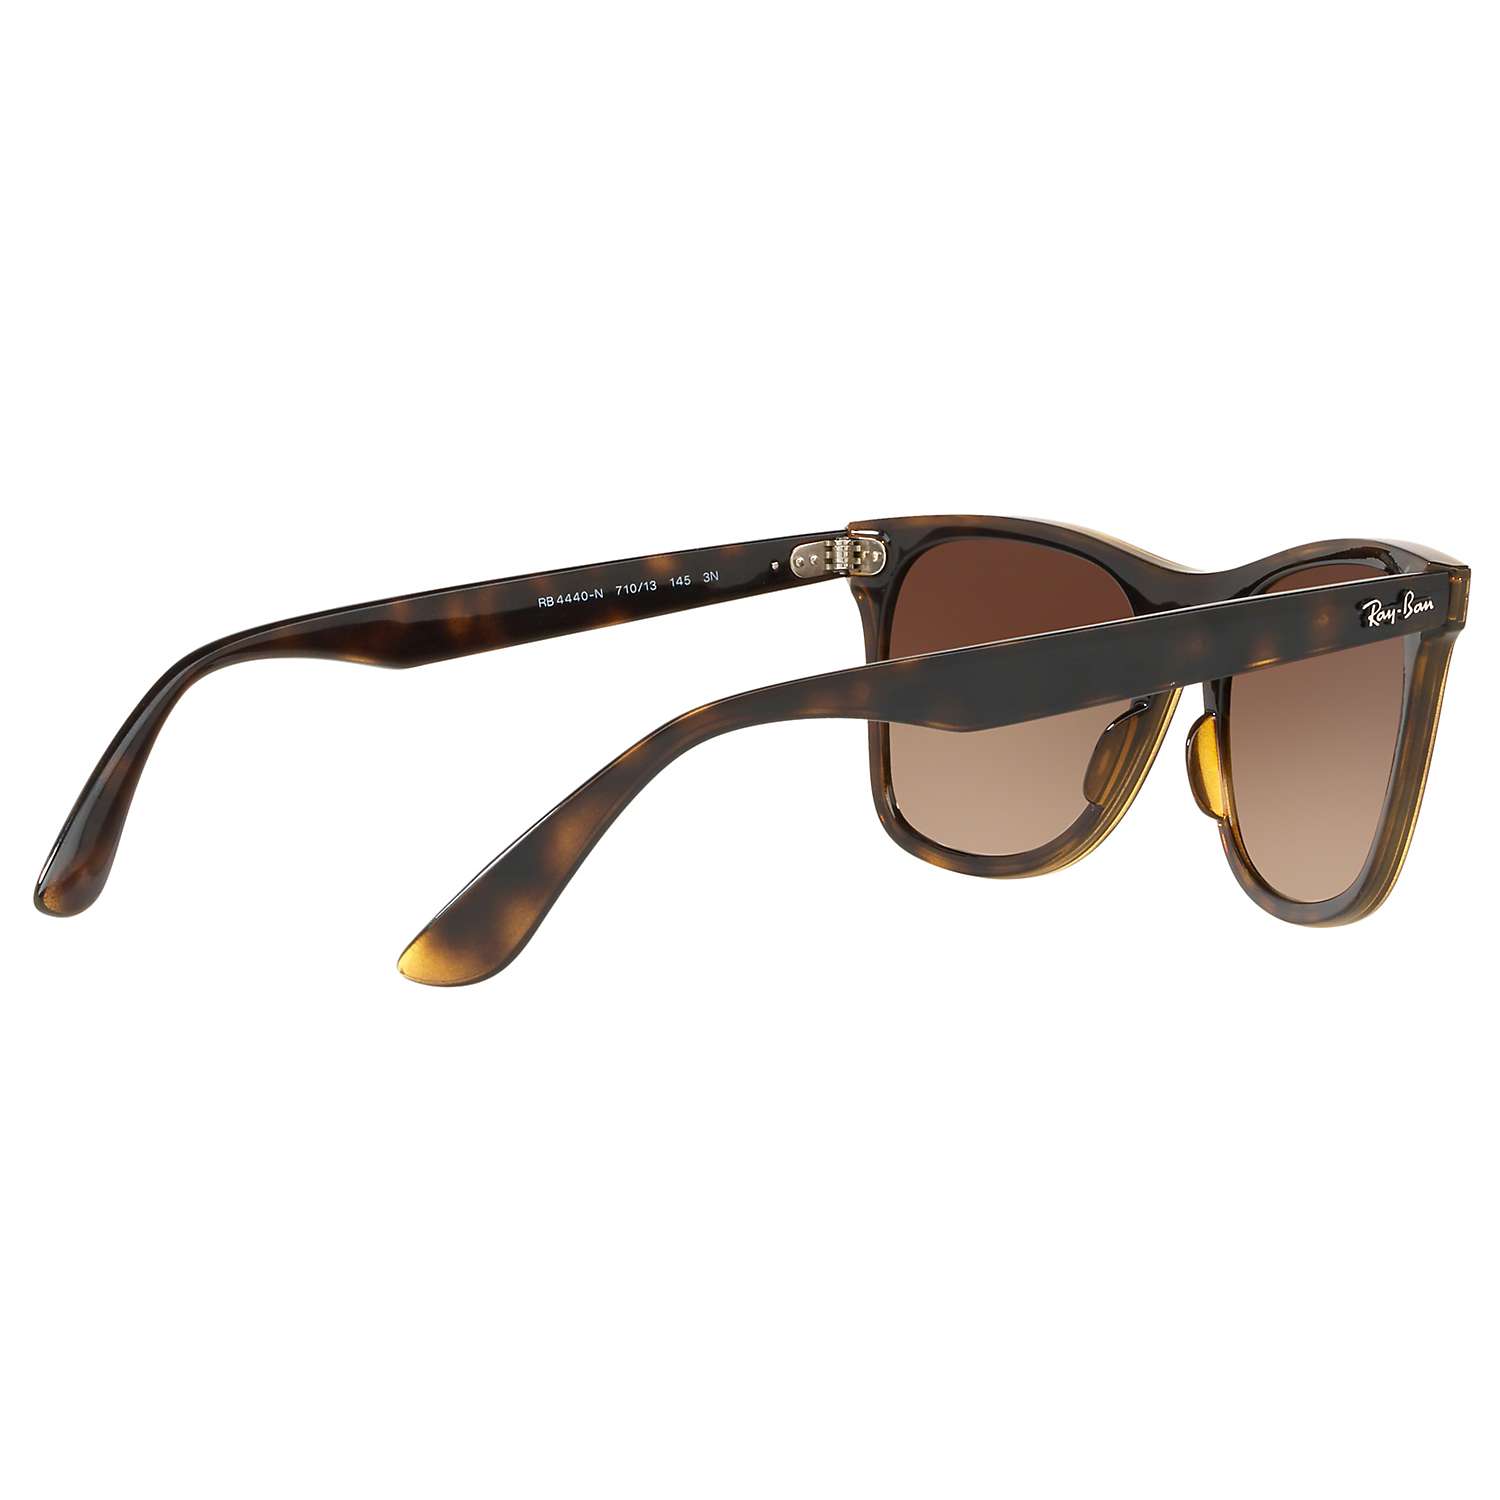 Buy Ray-Ban RB4440 Unisex Mirrored Sunglasses Online at johnlewis.com